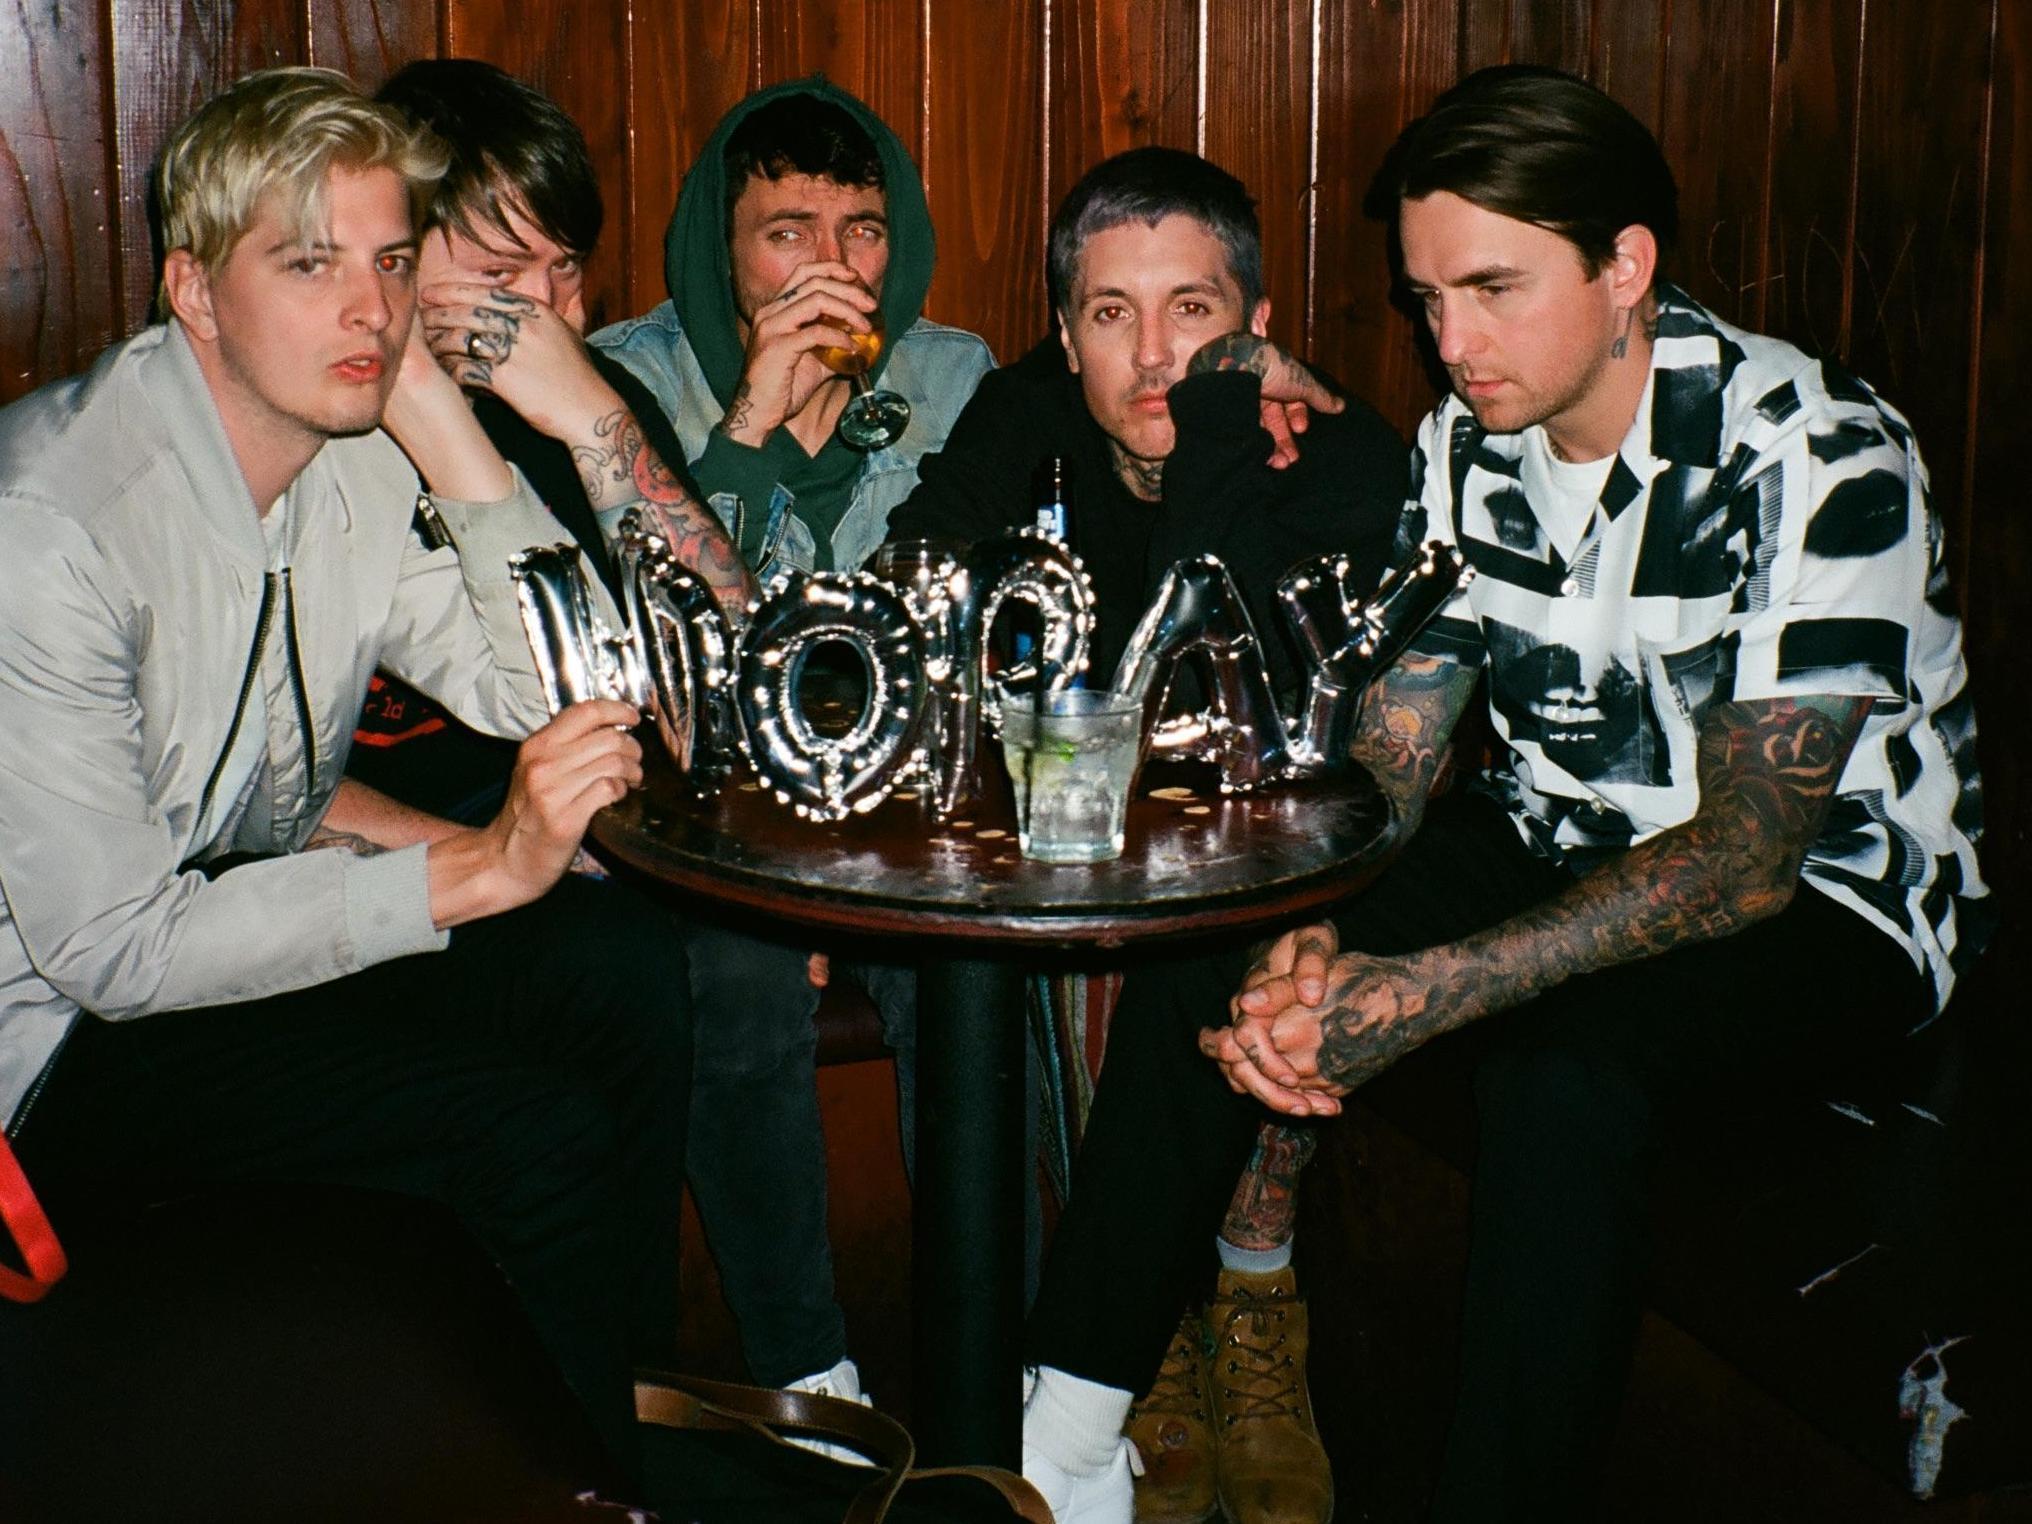 Bring Me the Horizon review, Amo: Daring album is likely to divide